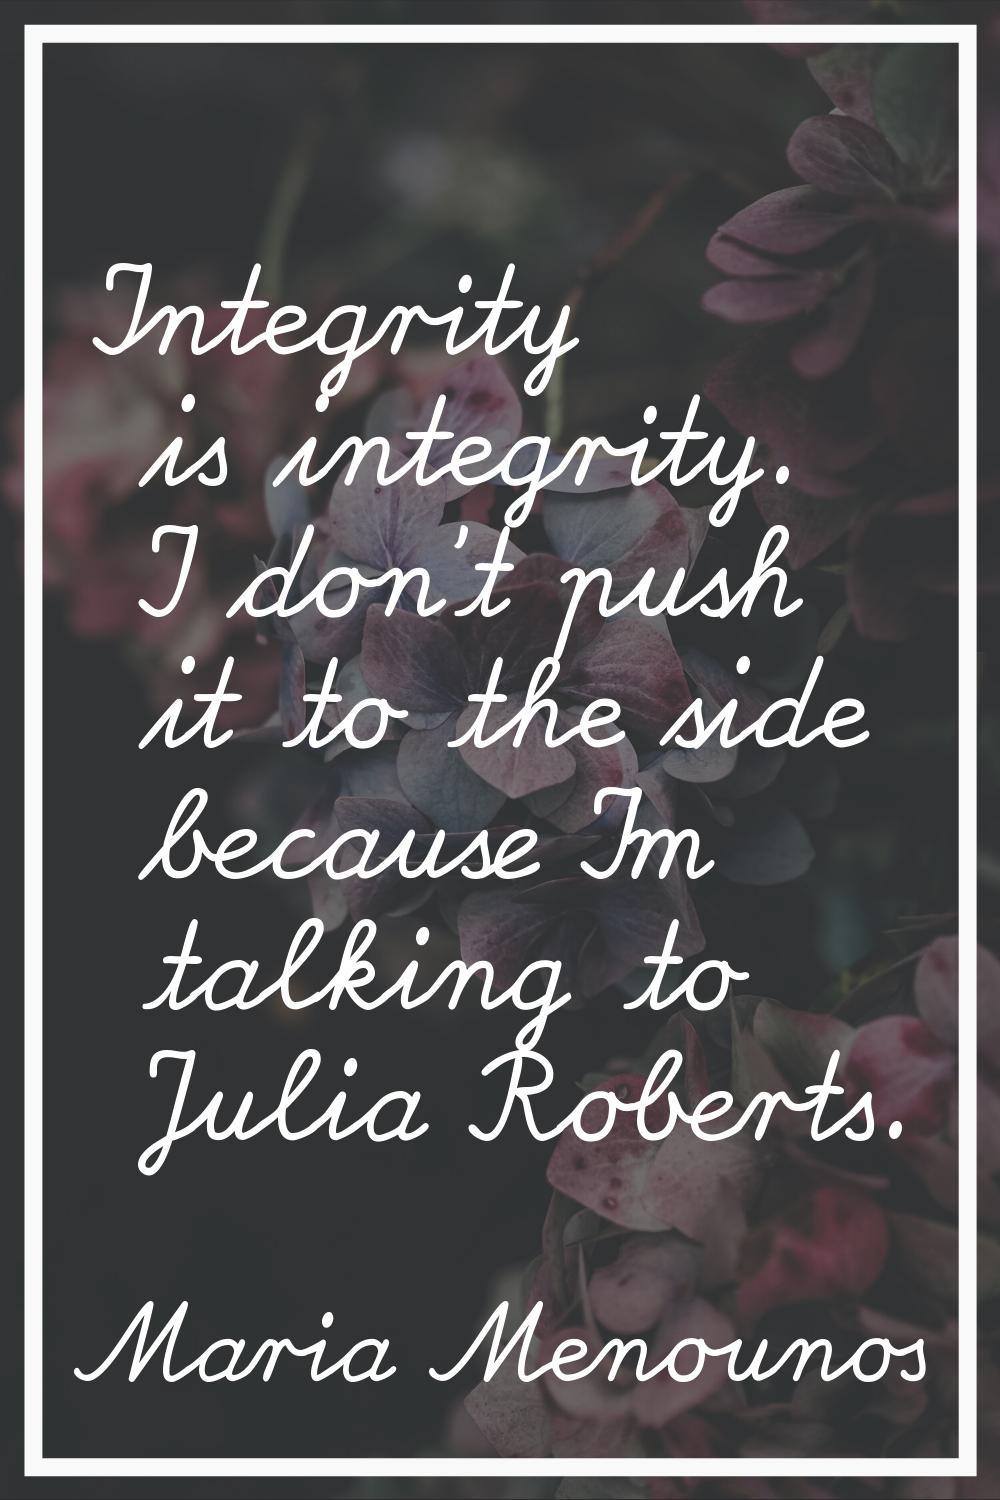 Integrity is integrity. I don't push it to the side because I'm talking to Julia Roberts.